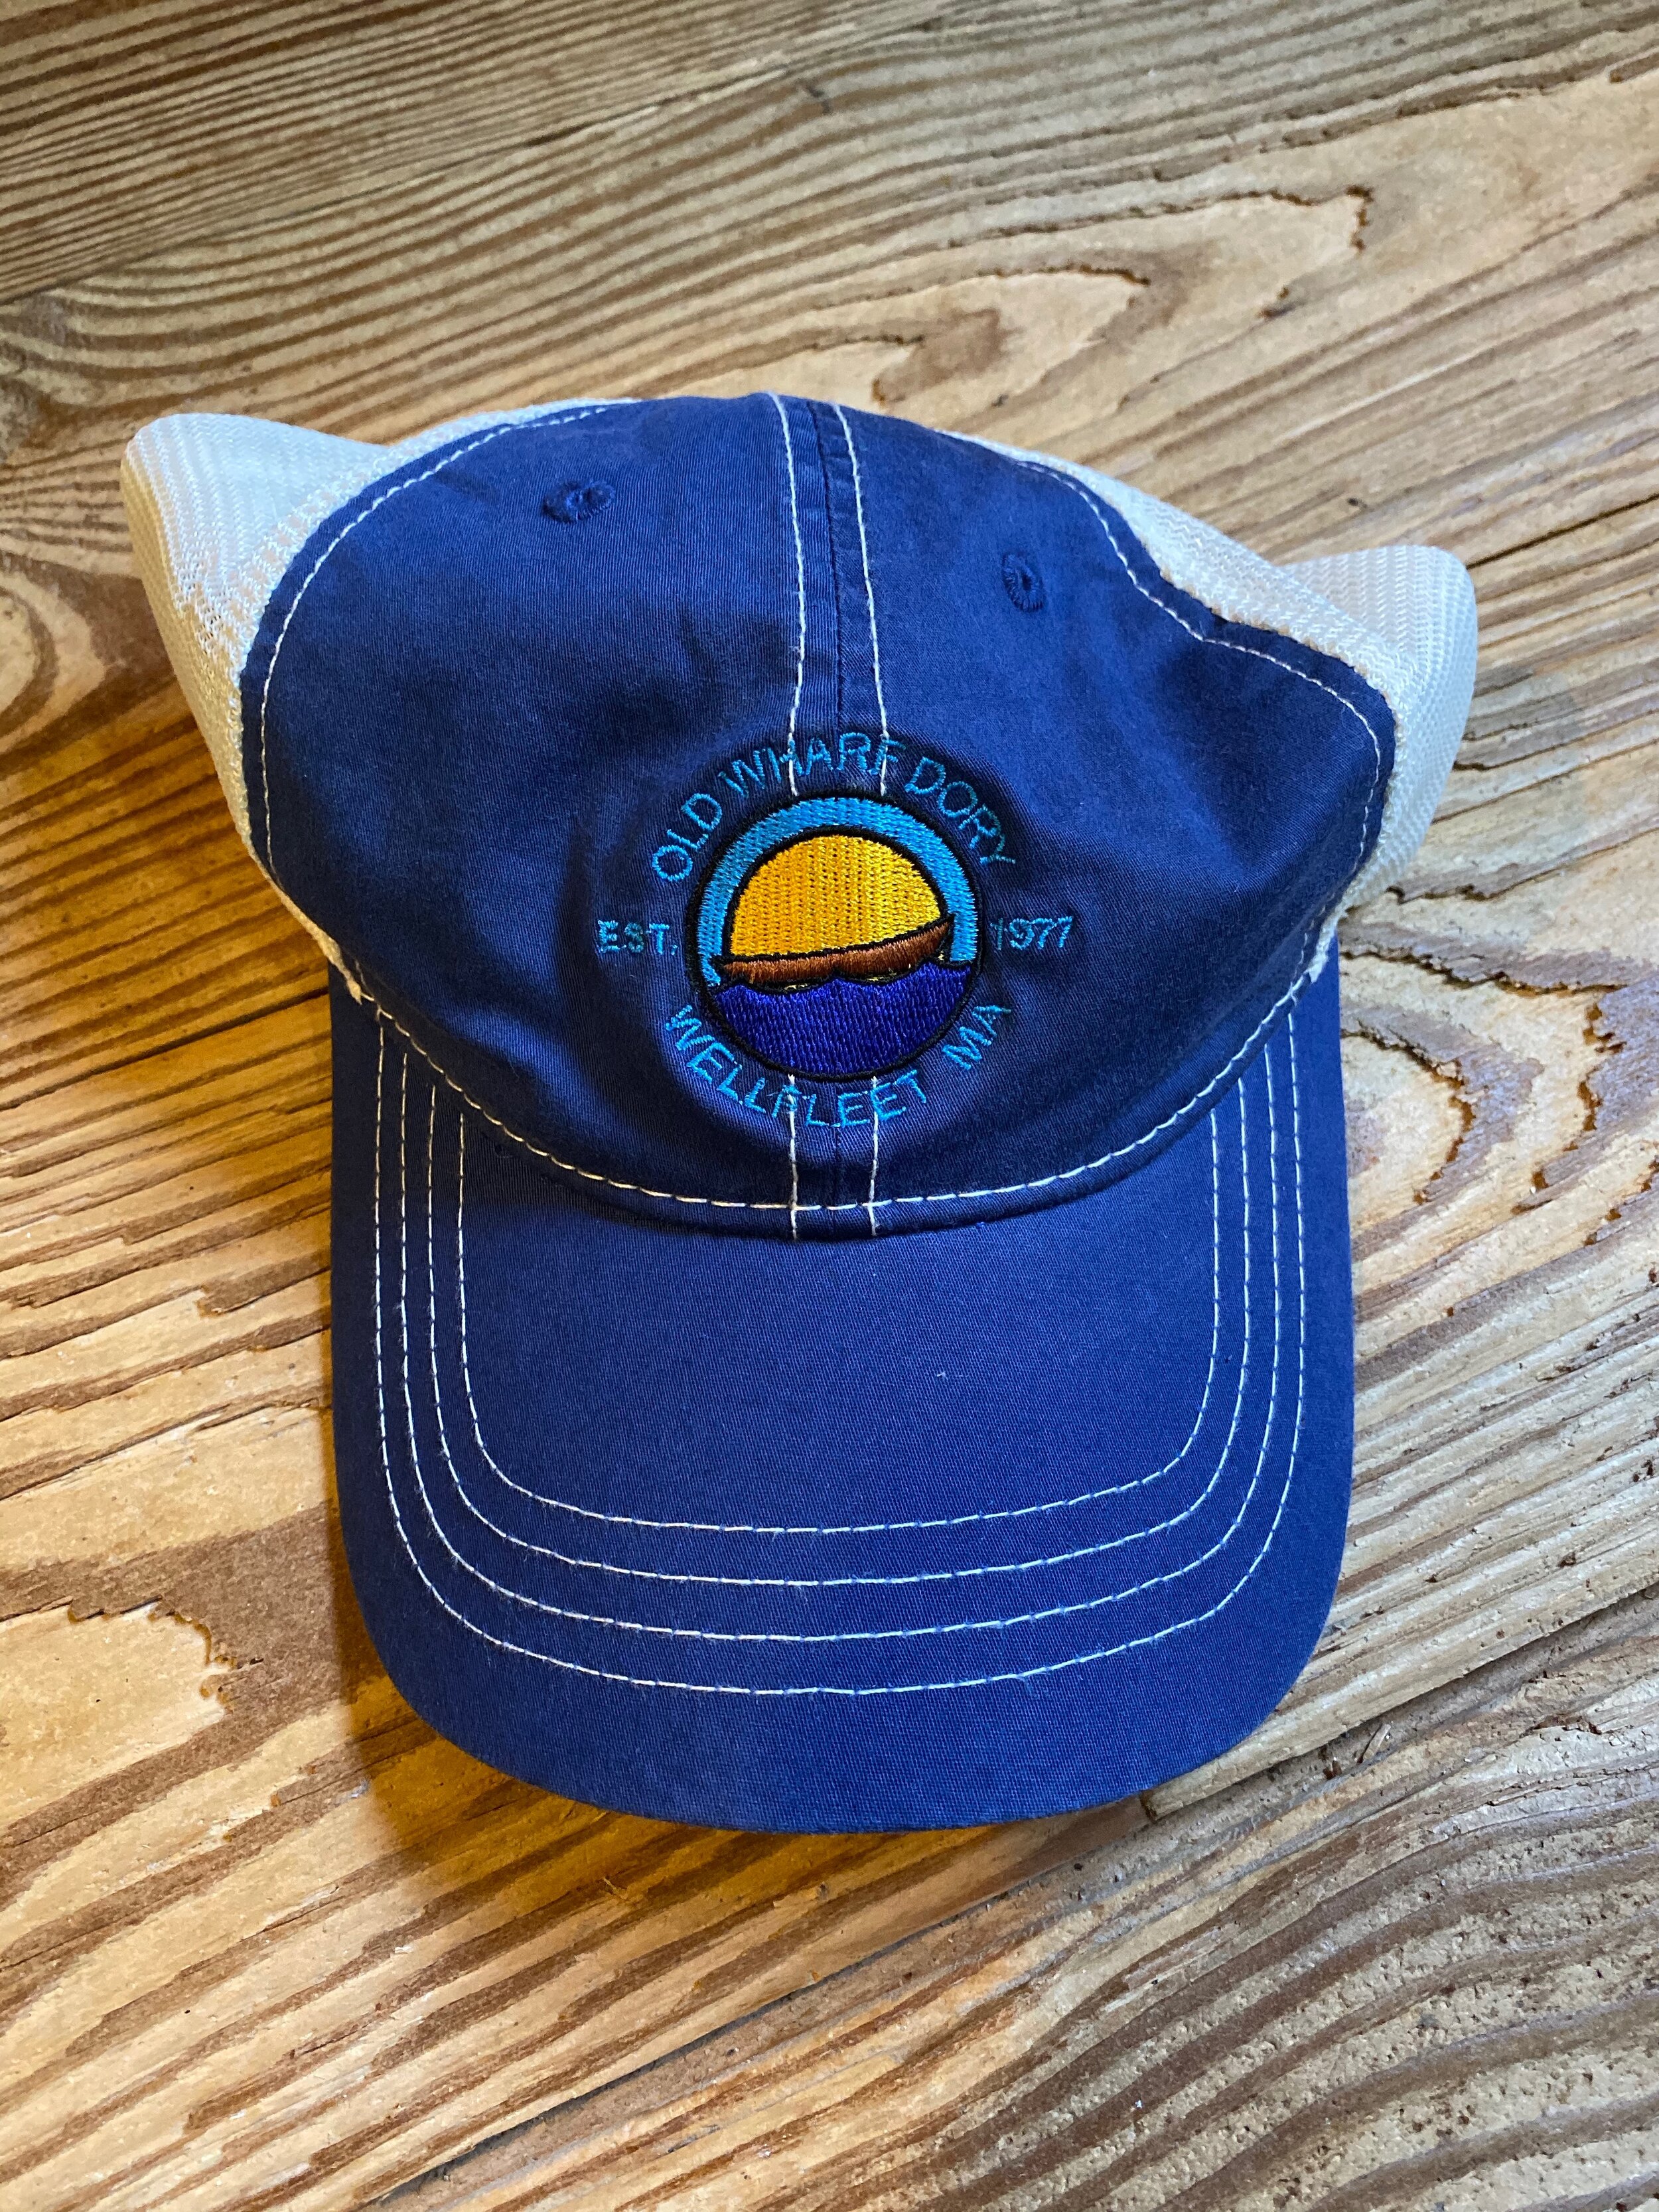 New Old Wharf Dory hat.